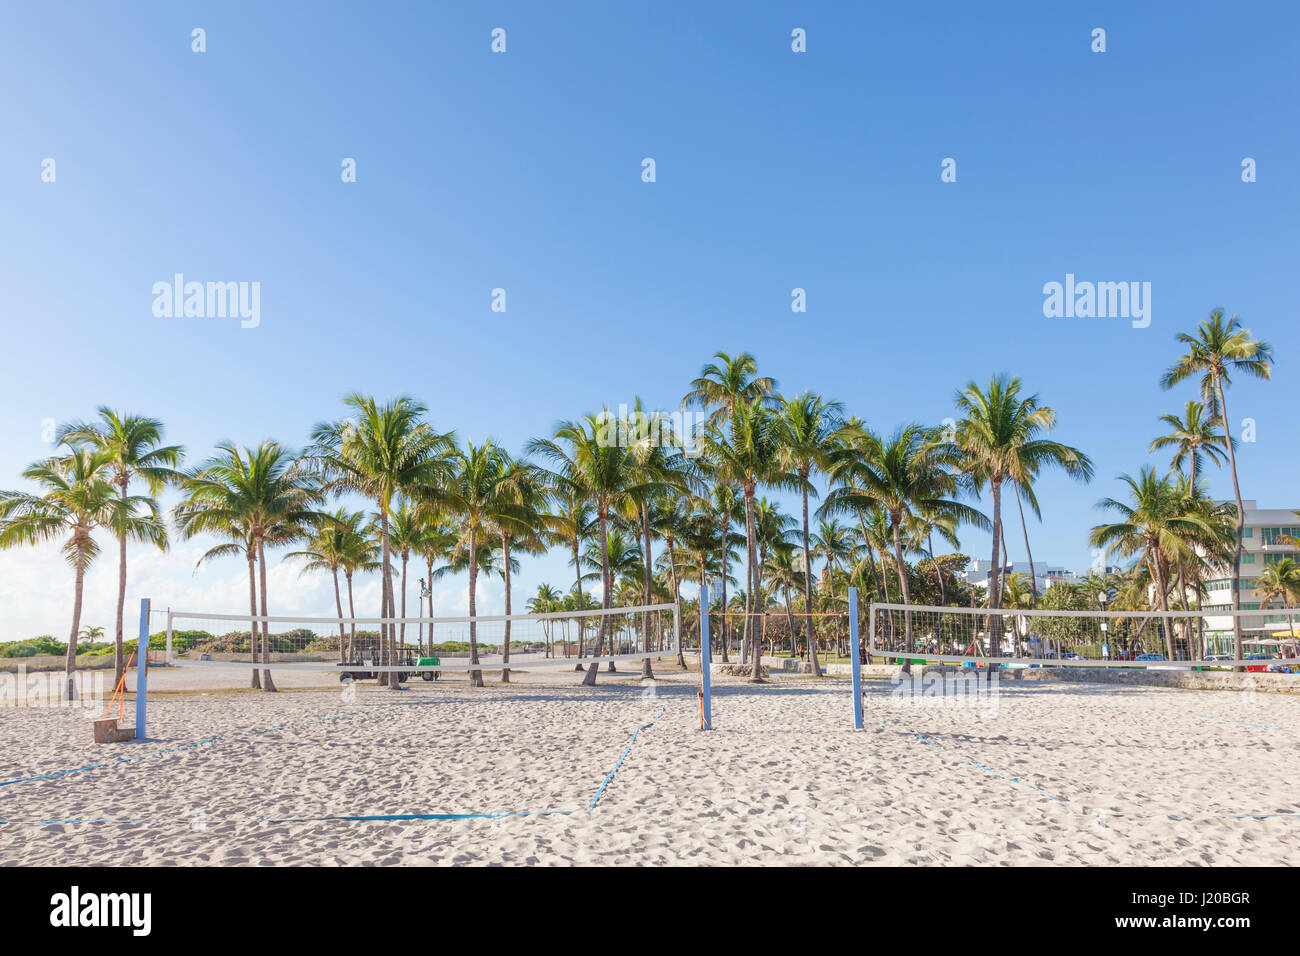 Volleyball courts and palm trees in Miami Beach. Florida, United States Stock Photo